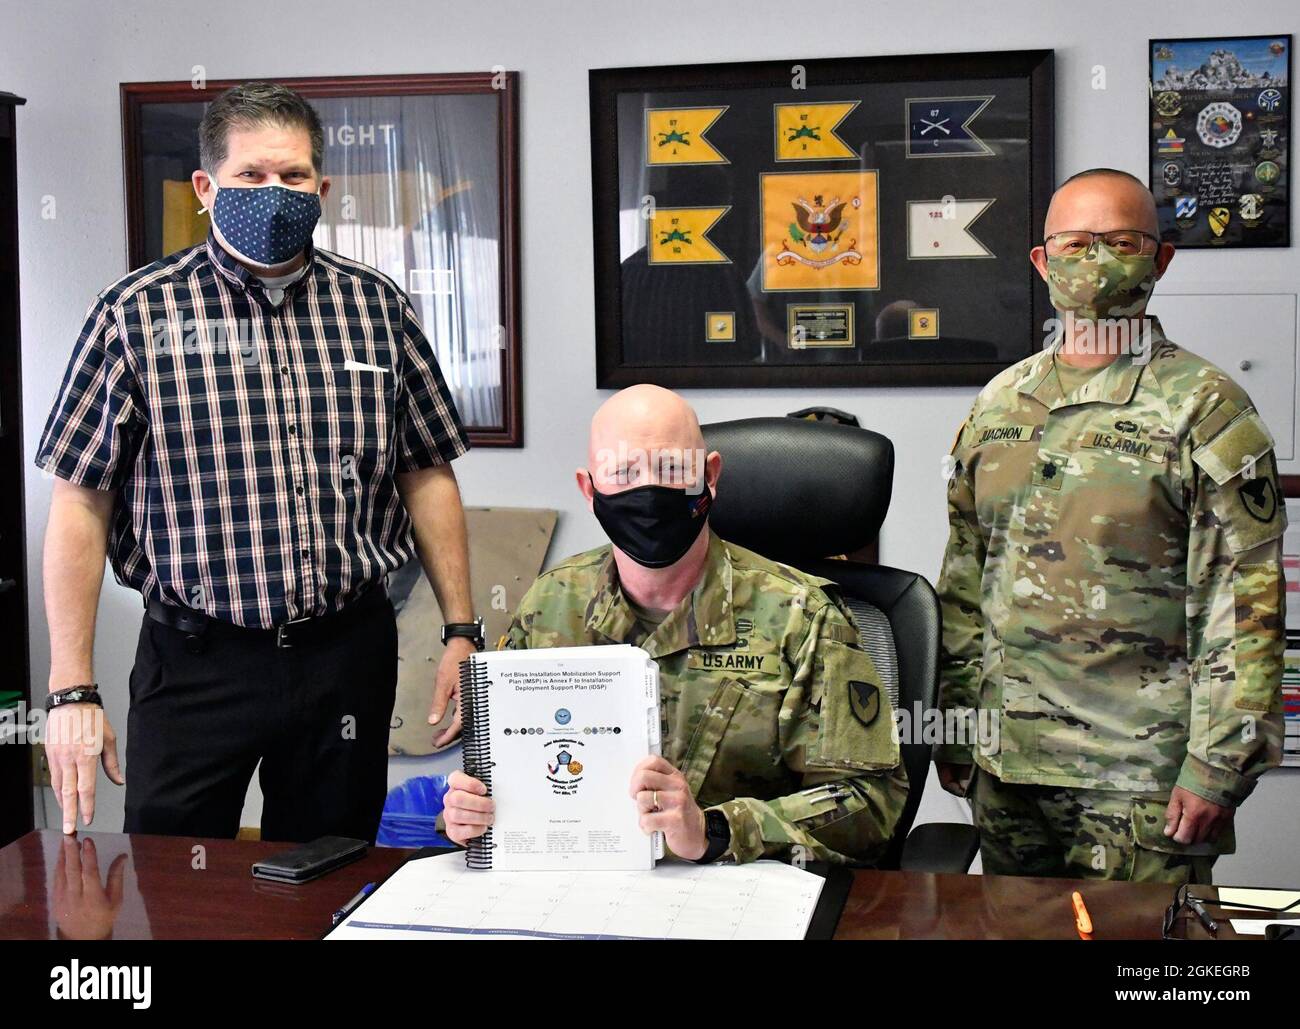 U.S. Army Col. Stu James, commander, U.S. Army Garrison Fort Bliss, center, is accompanied by Mr. Jaymes Picott, mobilization chief, left, and Lt. Col. John Juachon, mobilization planner, right, both assigned to the Mobilization Division, Directorate of Plans, Training, Mobilization & Security (DPTMS), after signing the Fort Bliss Installation Mobilization Support Plan, March 31, 2021, Fort Bliss, Texas. Stock Photo